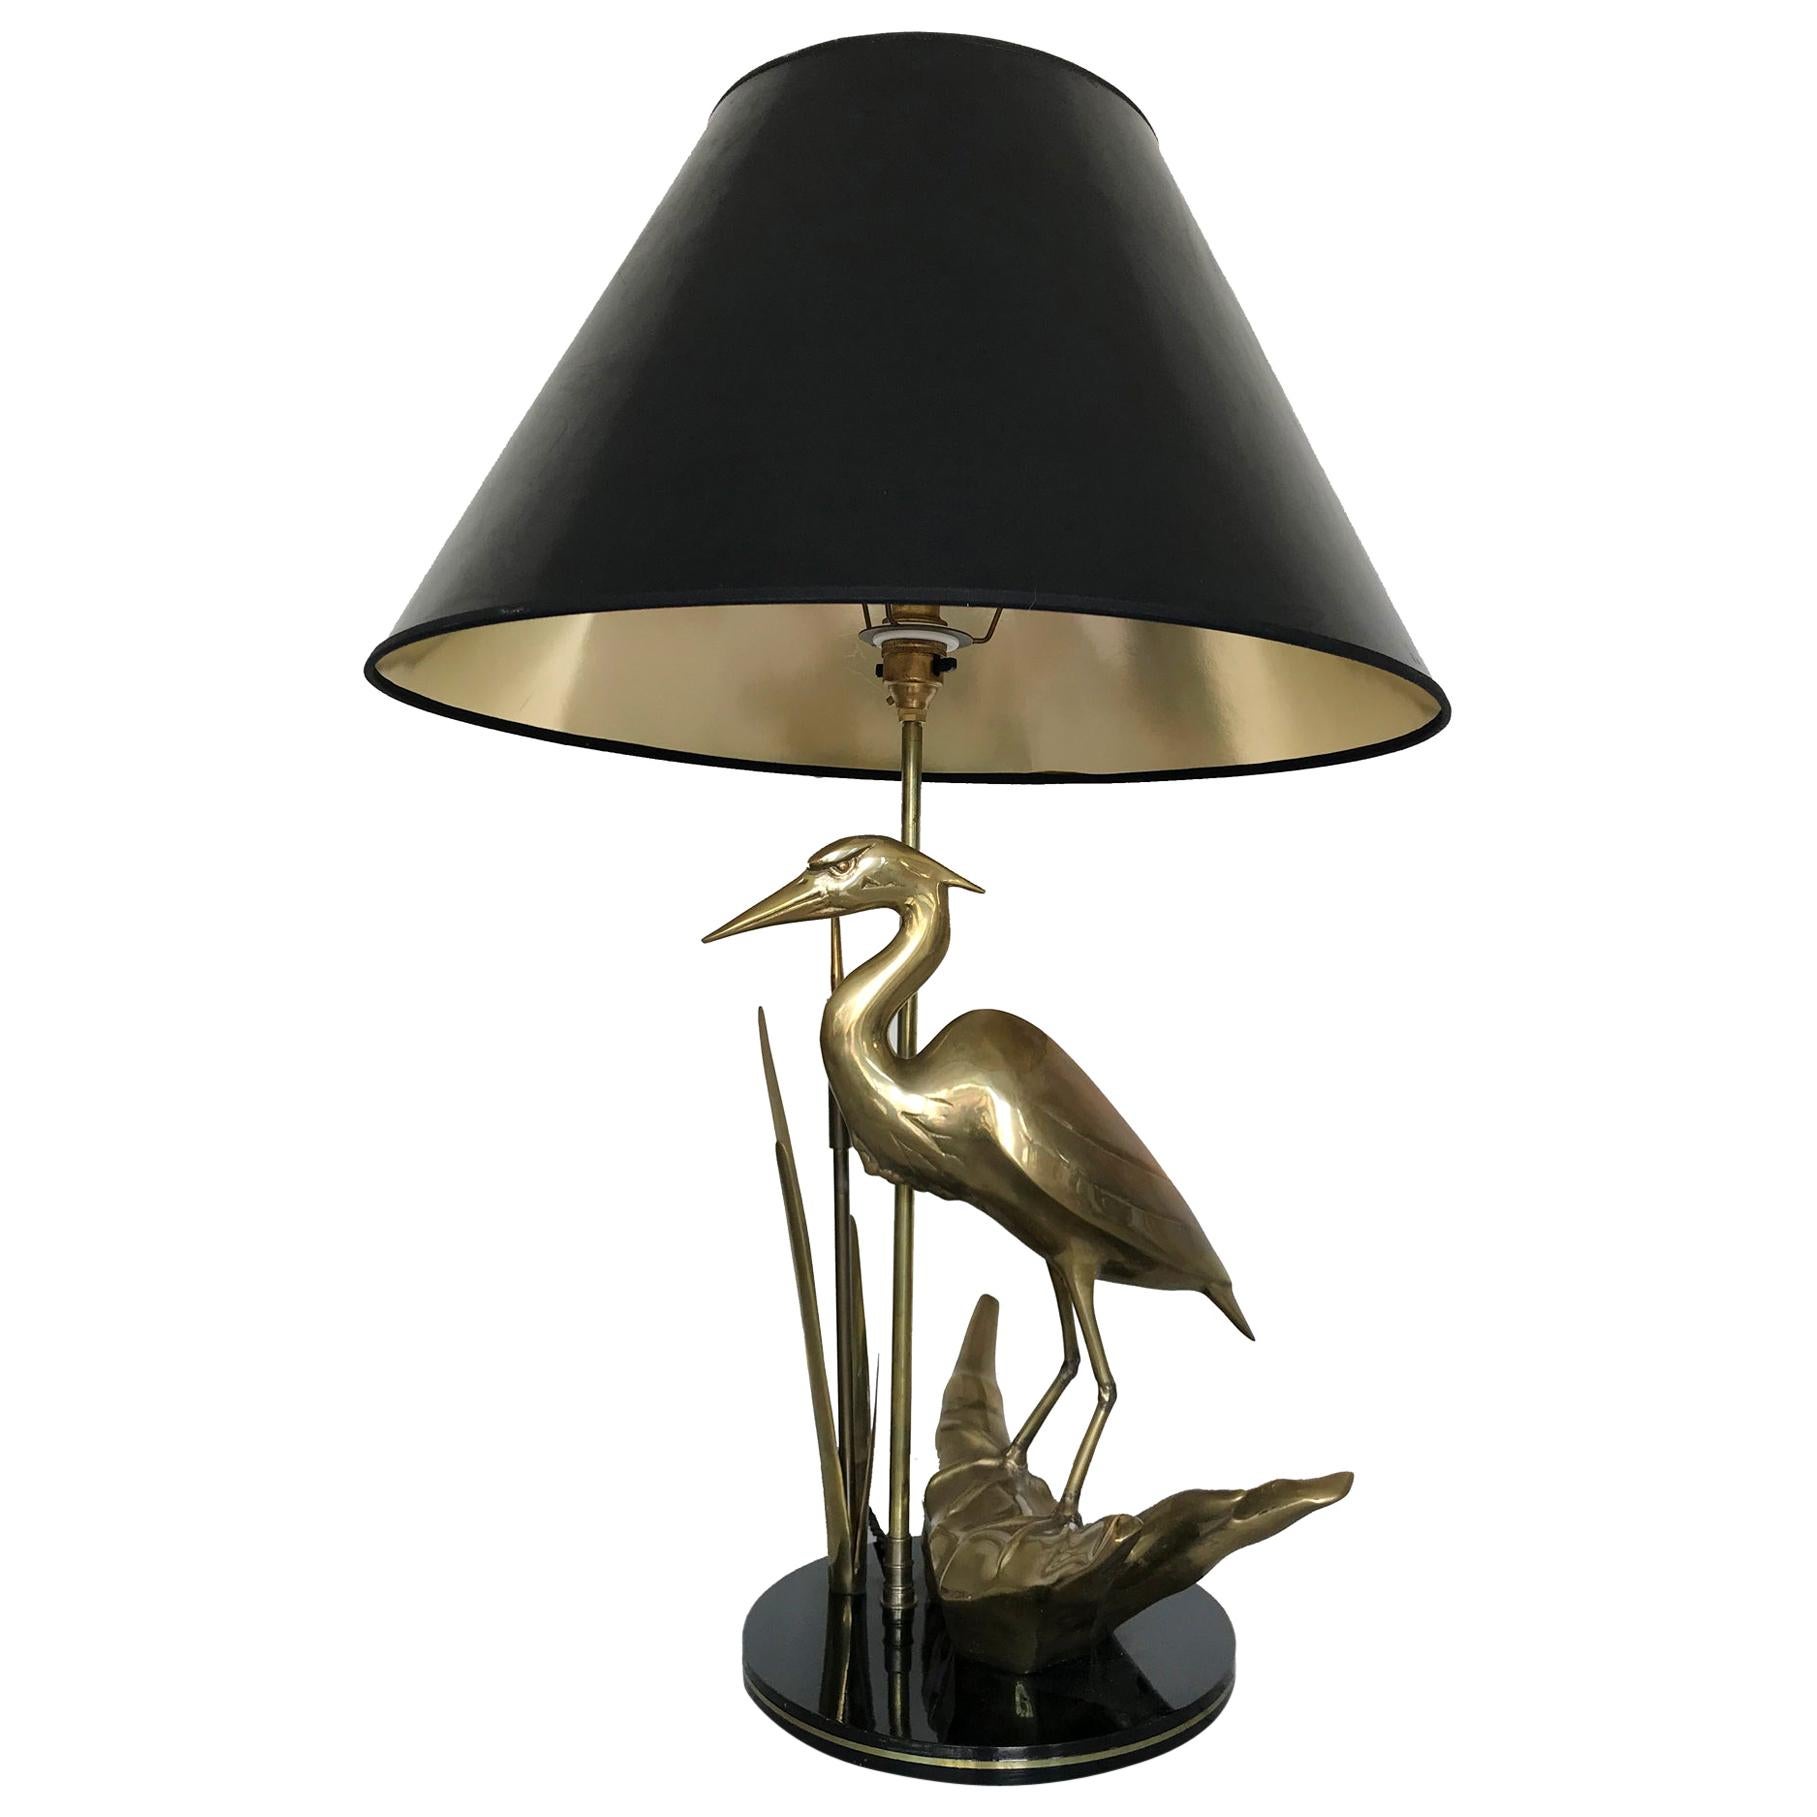 MIDCENTURY SCULPTURAL LAMP in Brass with Heron 1969 Hollywood Regency Style